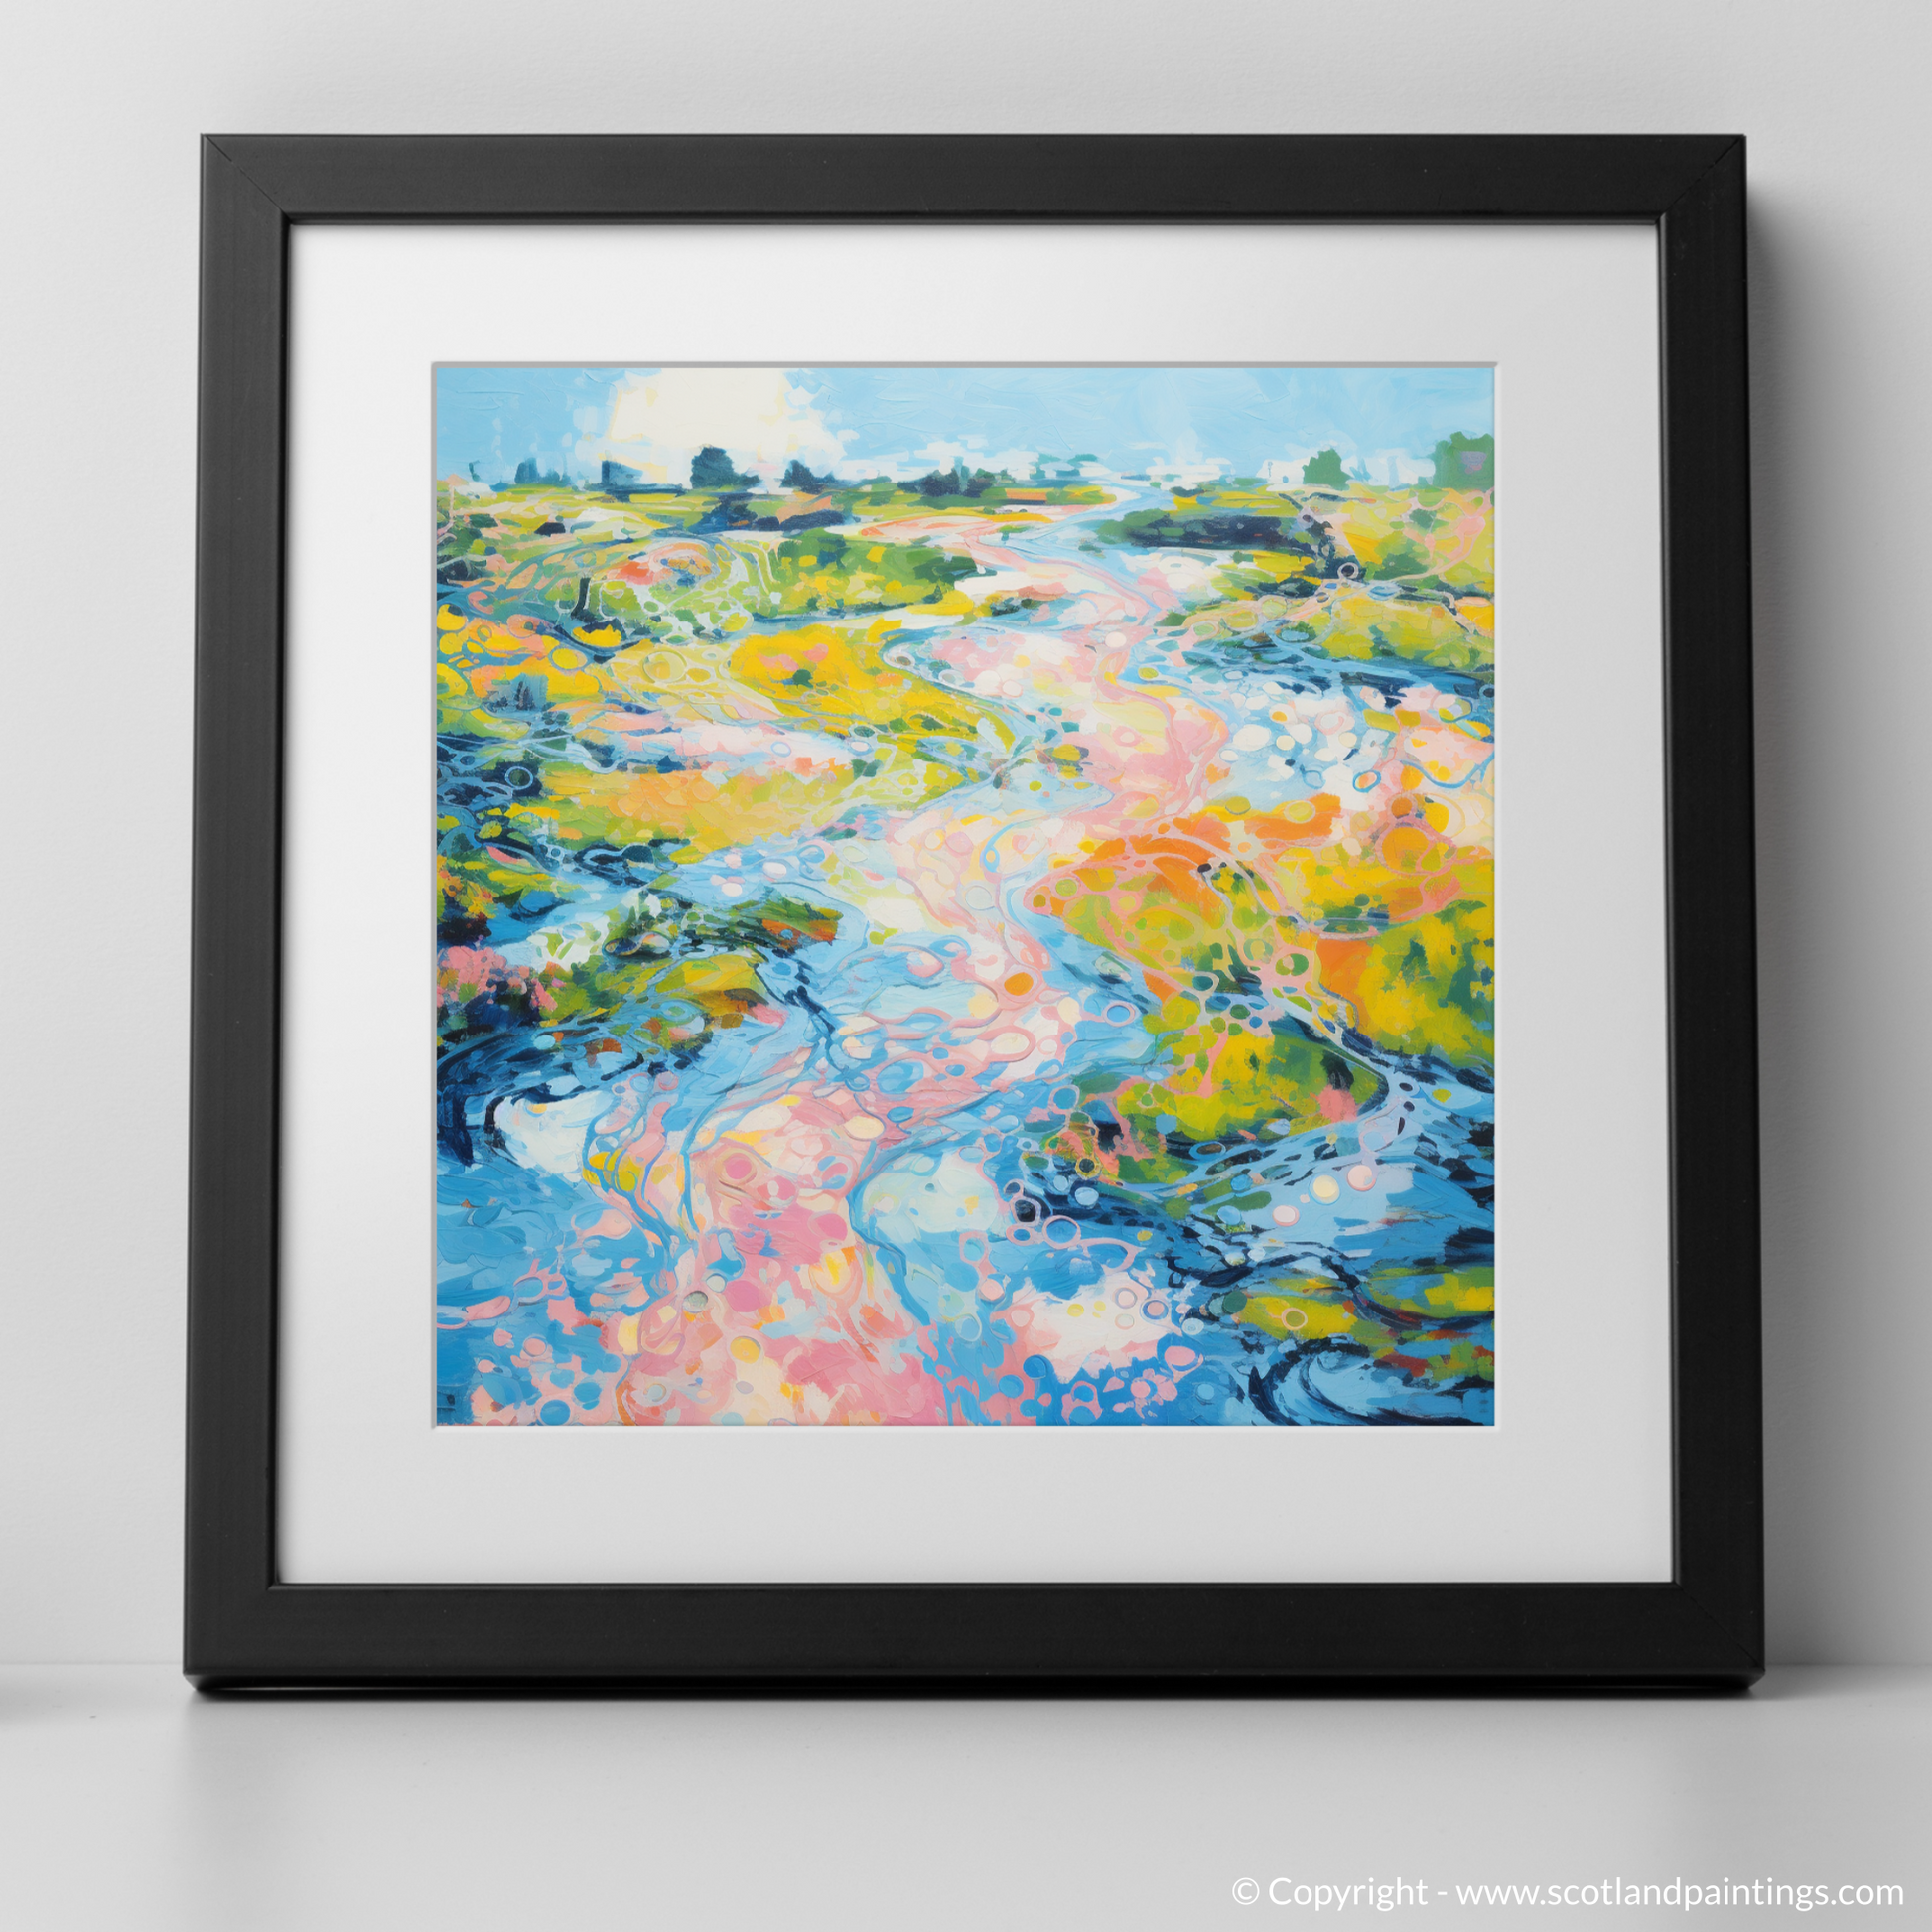 Art Print of River Dee, Aberdeenshire in summer with a black frame